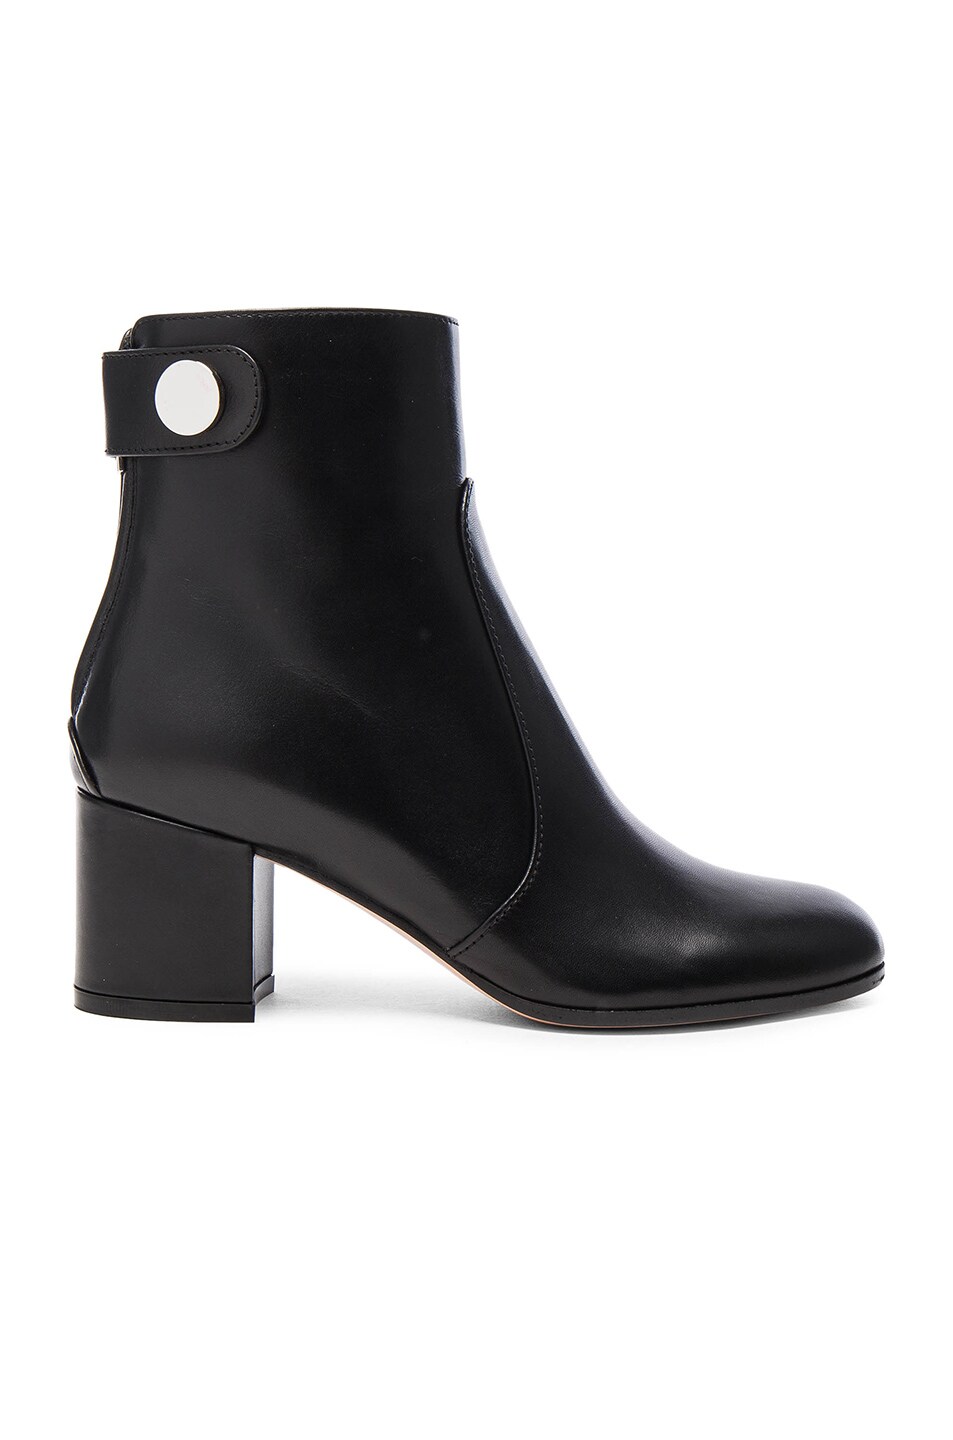 Image 1 of Gianvito Rossi Leather Boots in Black